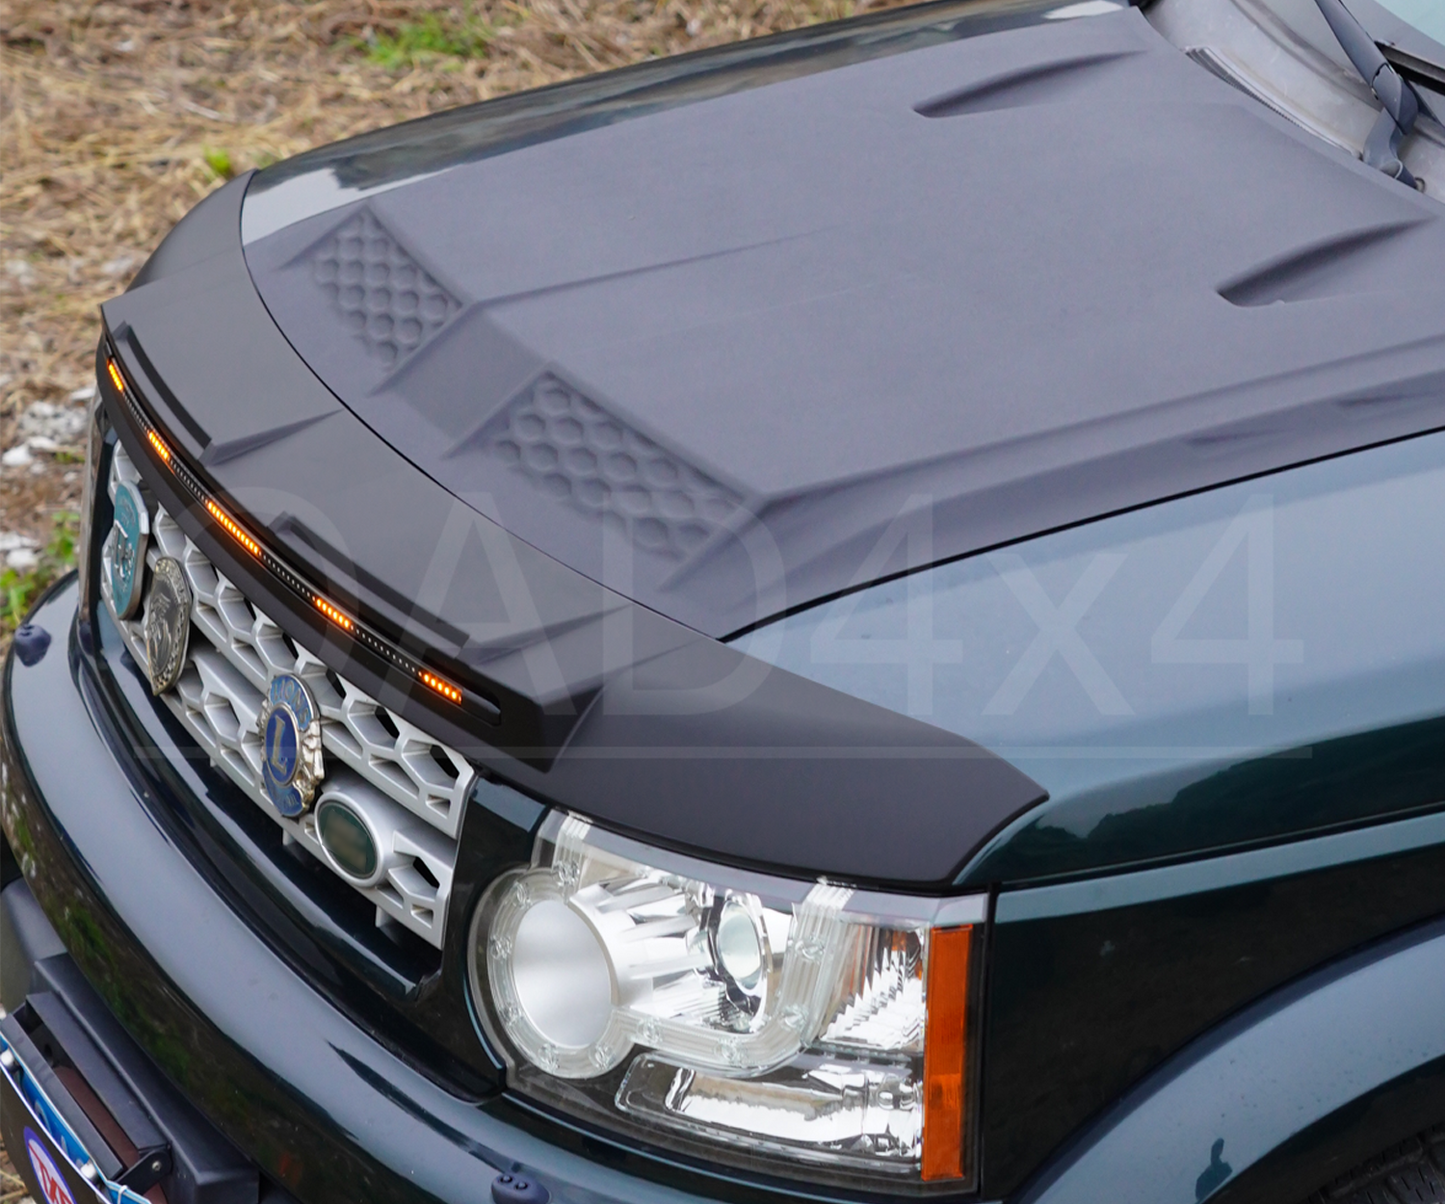 LED Light Bonnet Protector Hood Protector for Land Rover Discovery 3 4 2004-2017